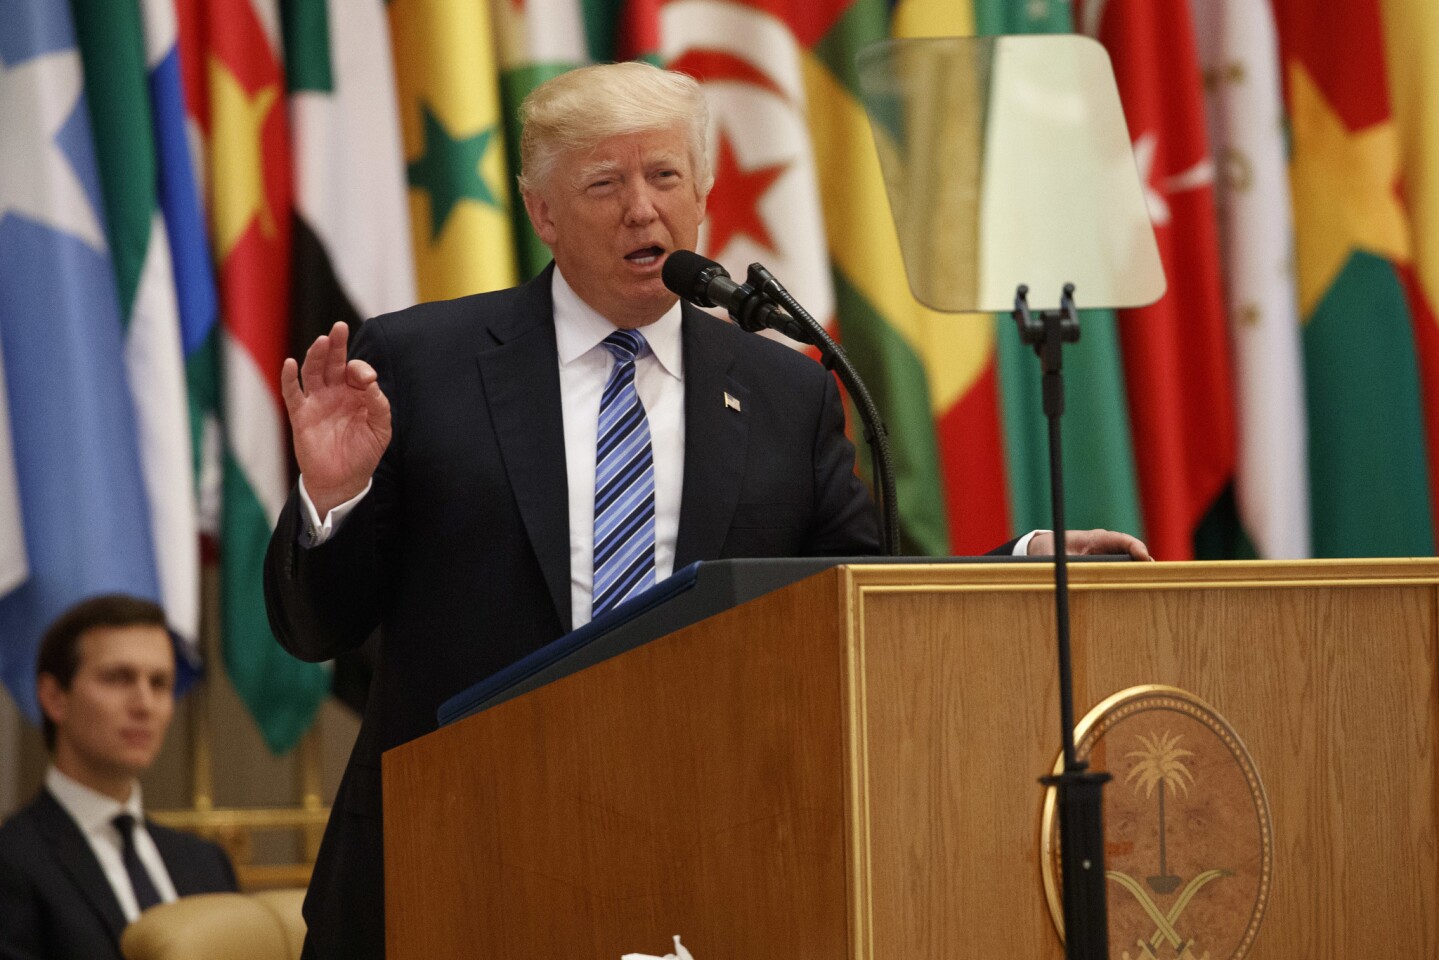 President Donald Trump delivers a speech to the Arab Islamic American Summit at the King Abdulaziz Conference Center on Sunday in Riyadh, Saudi Arabia.